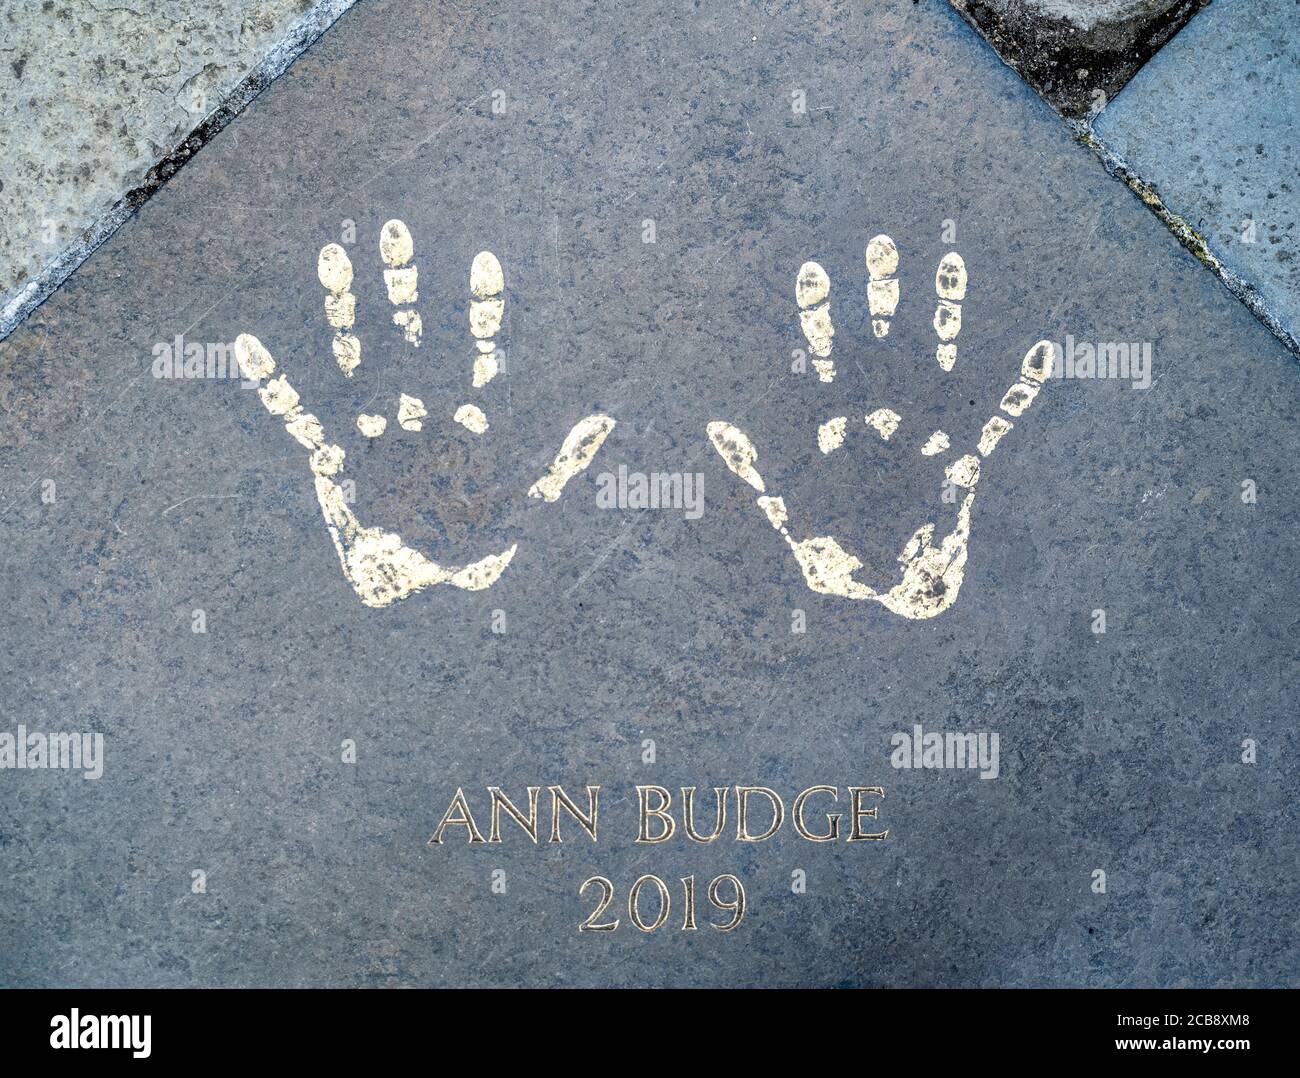 The hand prints of Ann Budge, Hearts FC owner, on a flagstone at the City Chambers, Edinburgh, she was the winner of the Edinburgh Award 2019. Stock Photo